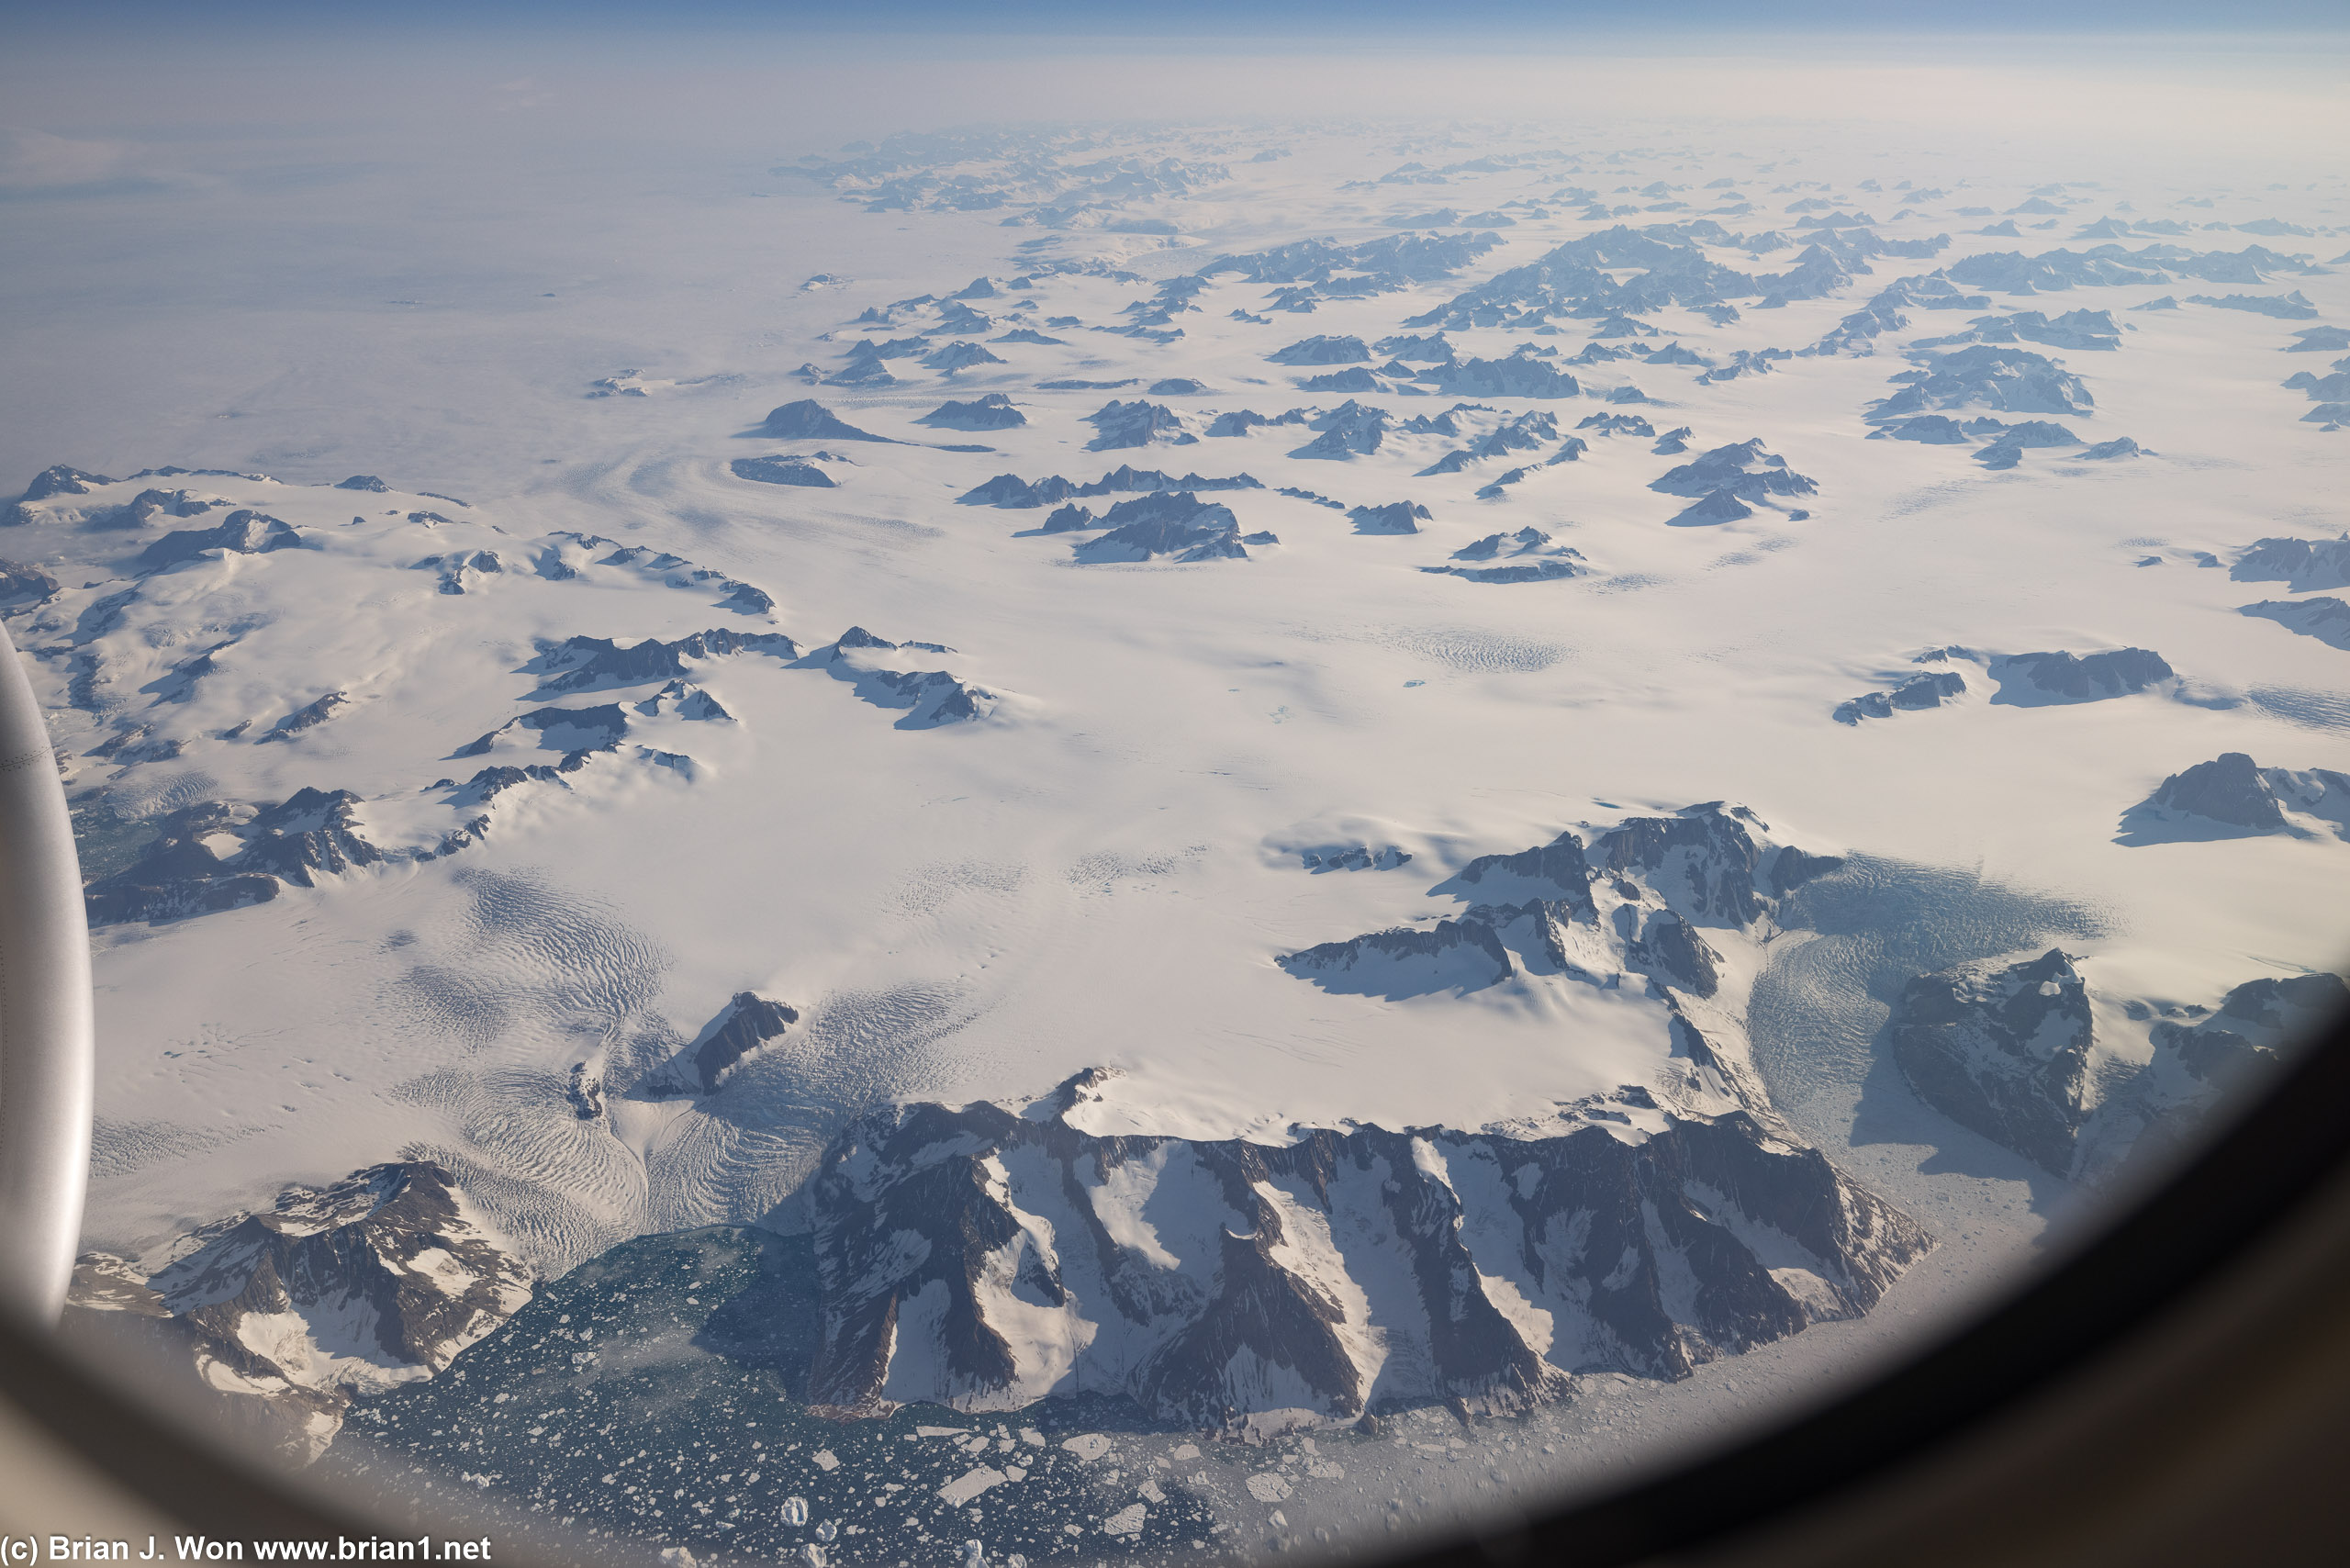 And feet dry again, somewhere over the east/southeastern coast of Greenland.